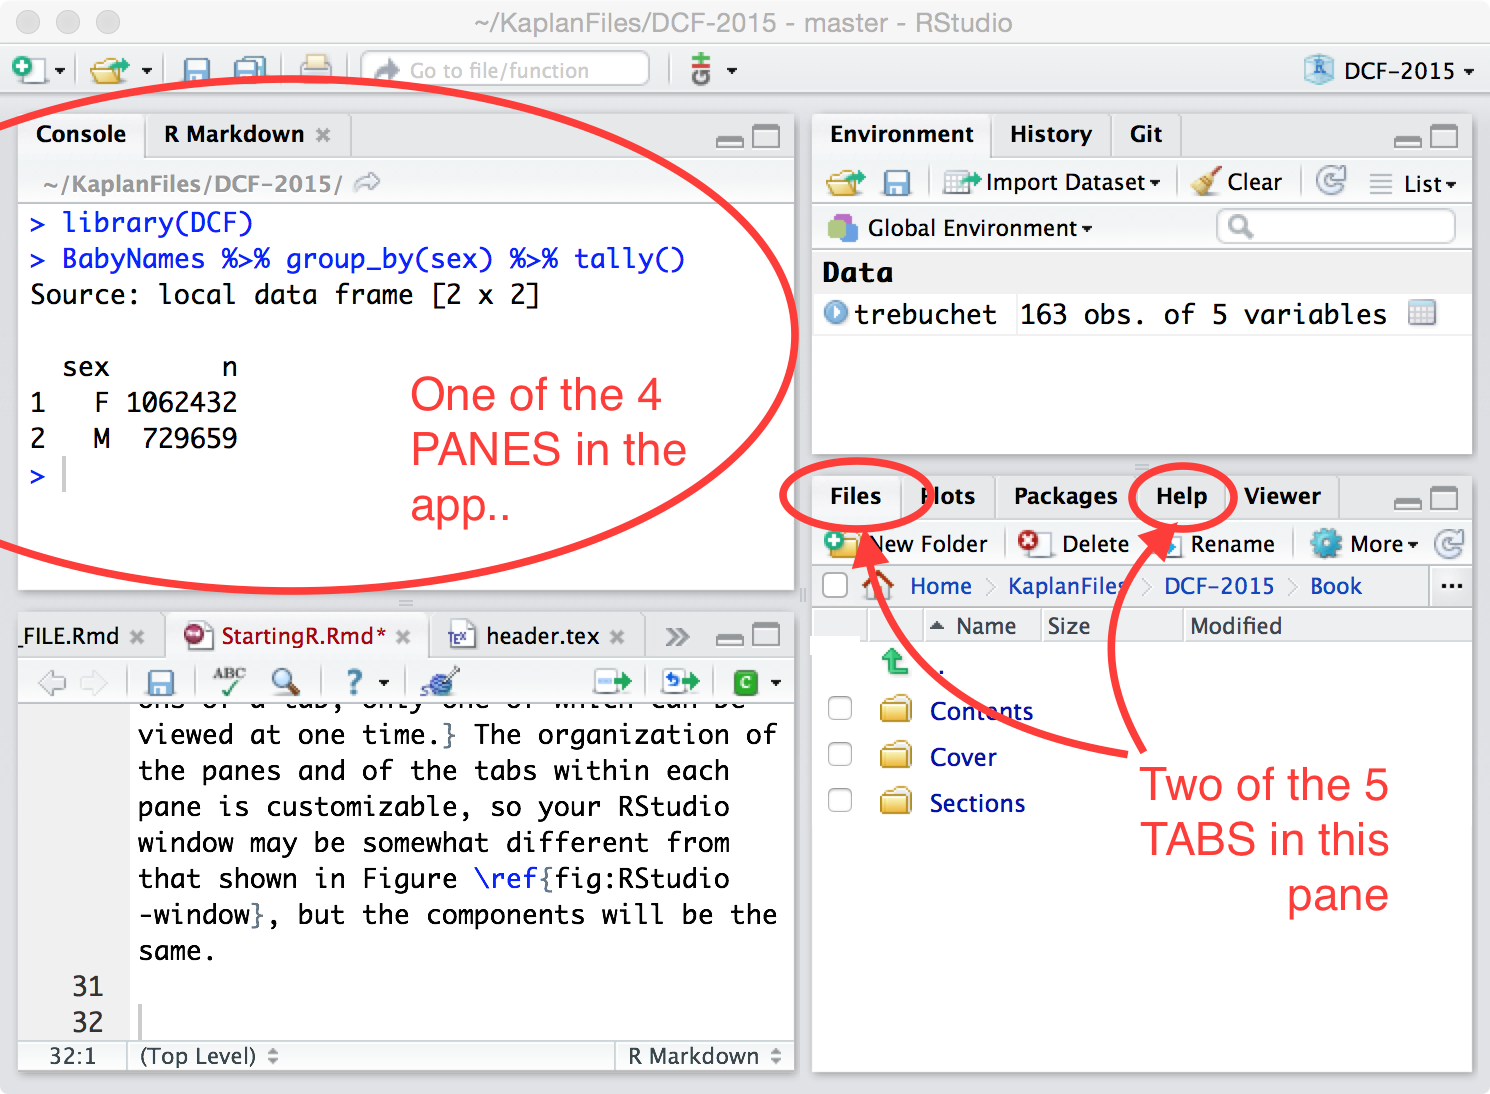 The RStudio window is divided into four panes. Each pane can contain multiple tabs.